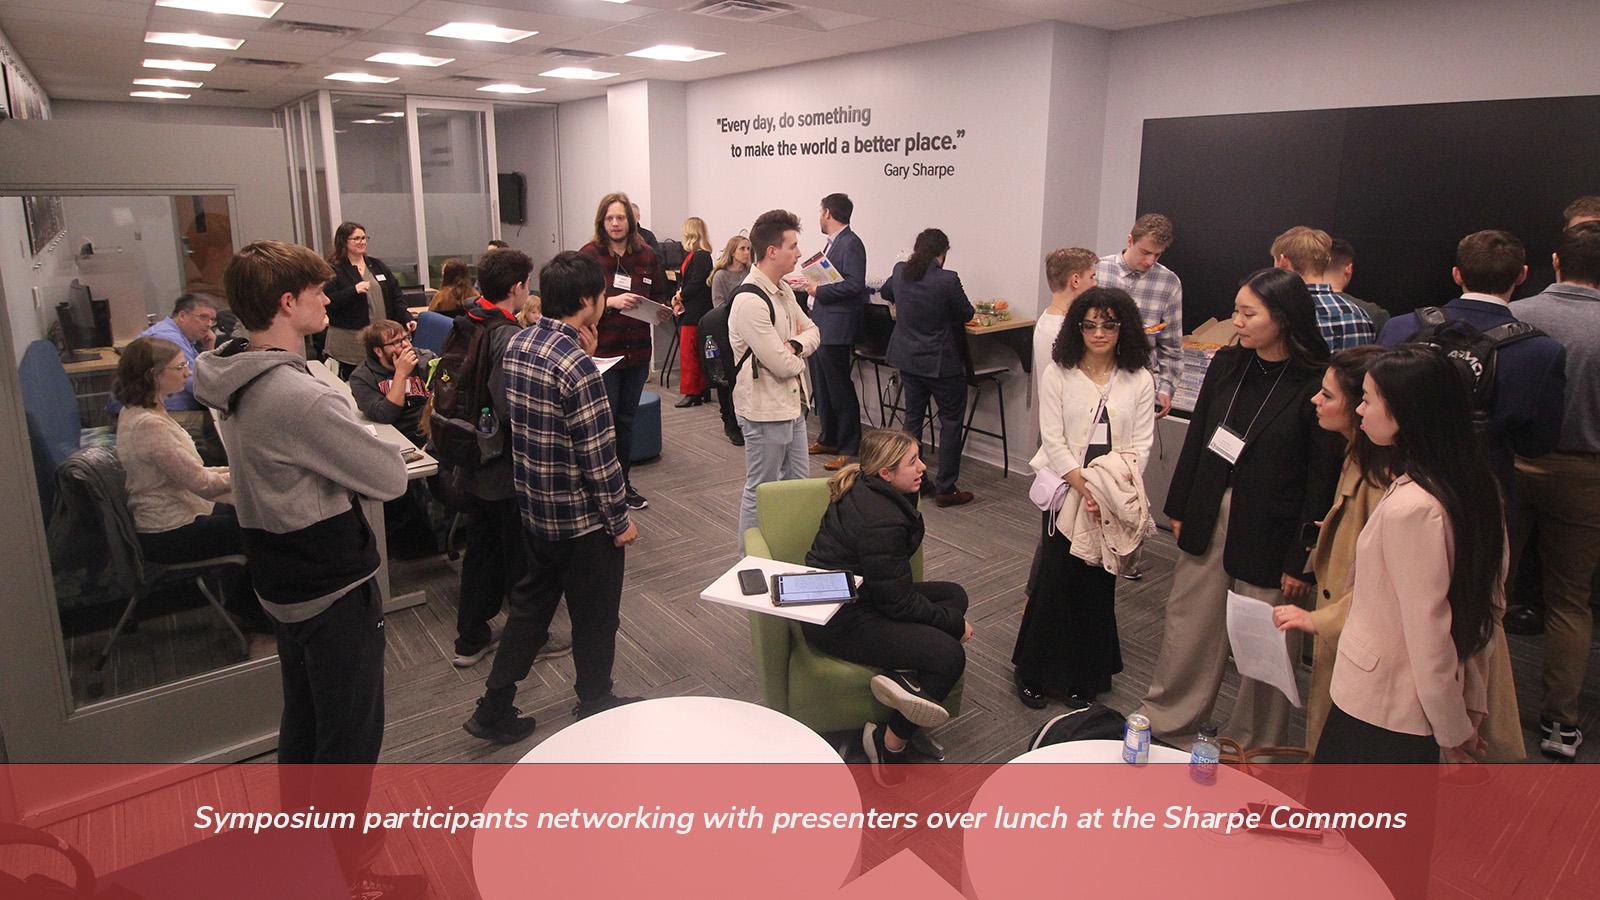 Symposium participants networking with presenters over lunch at the Sharpe Commons